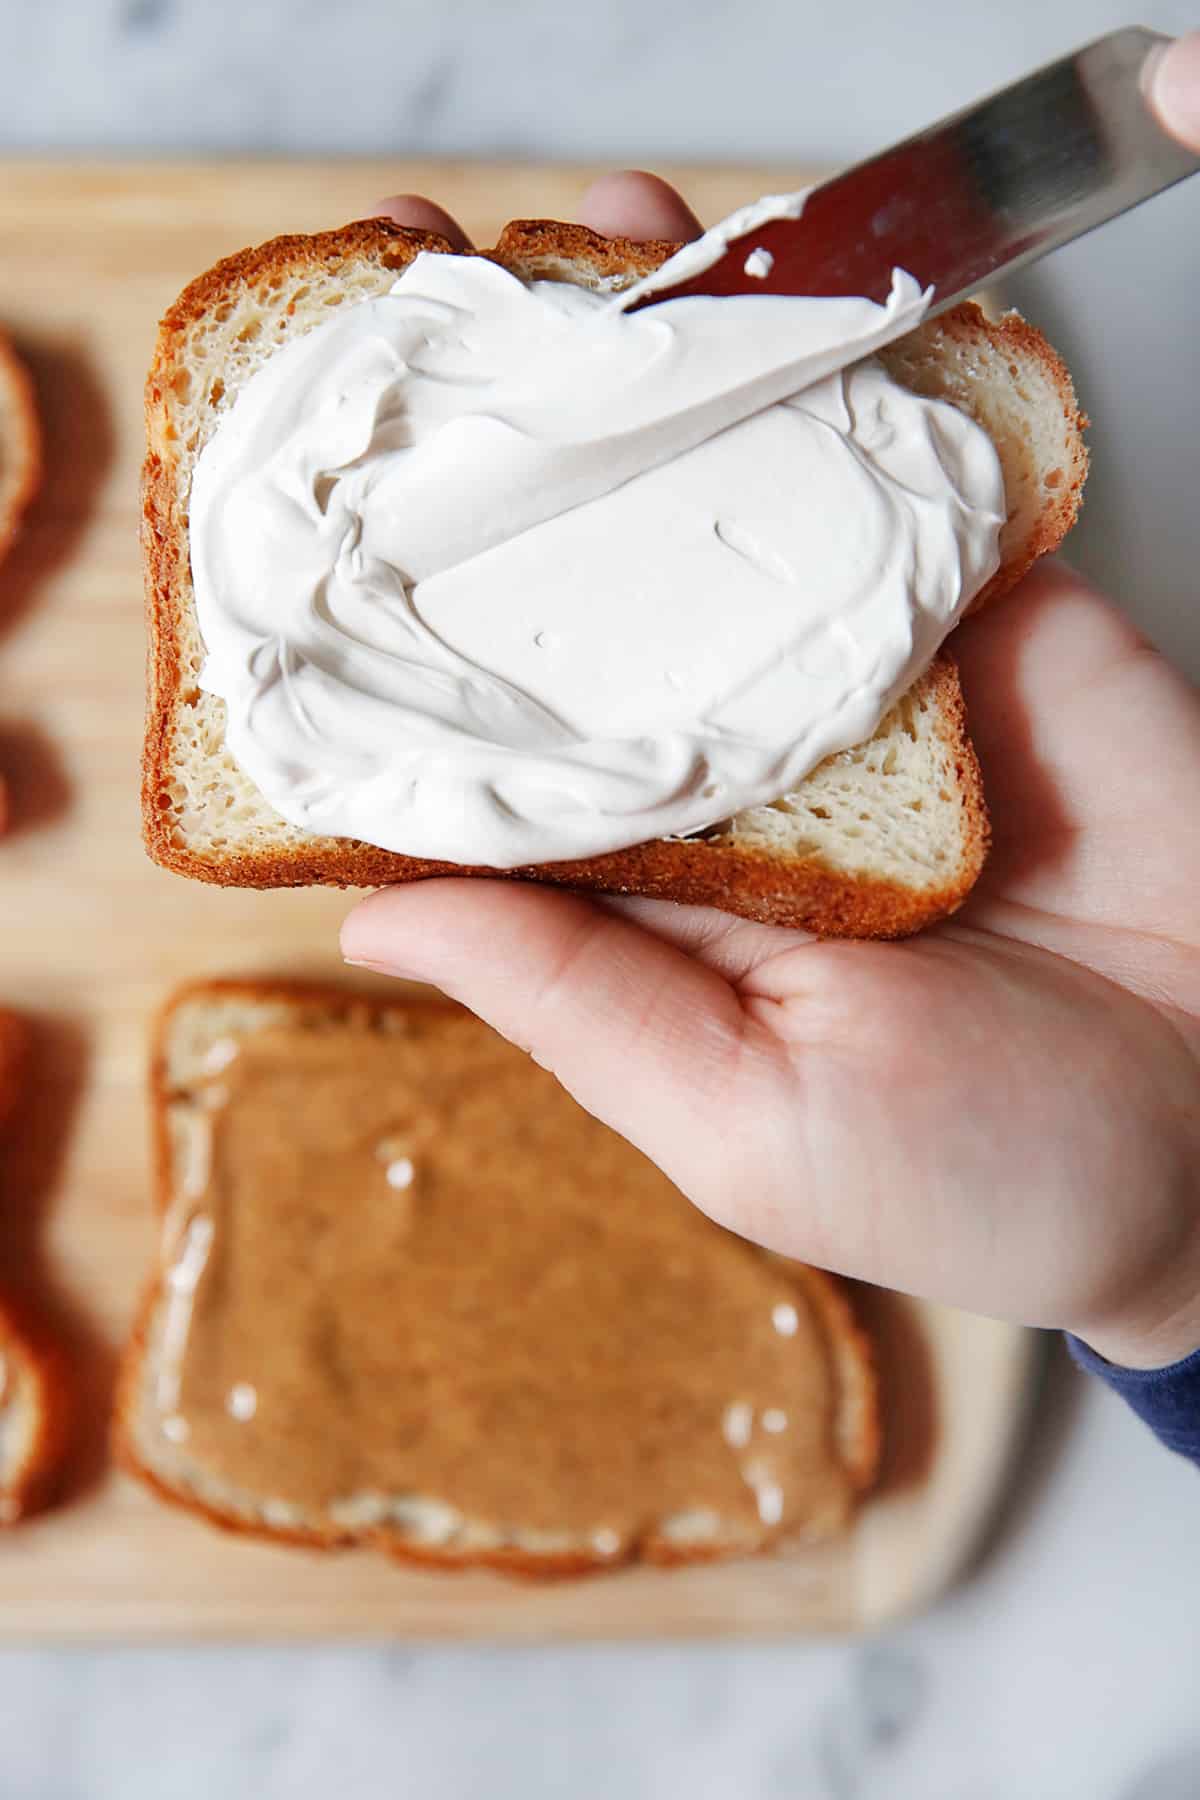 marshmallow fluff being spread on a slice of bread.